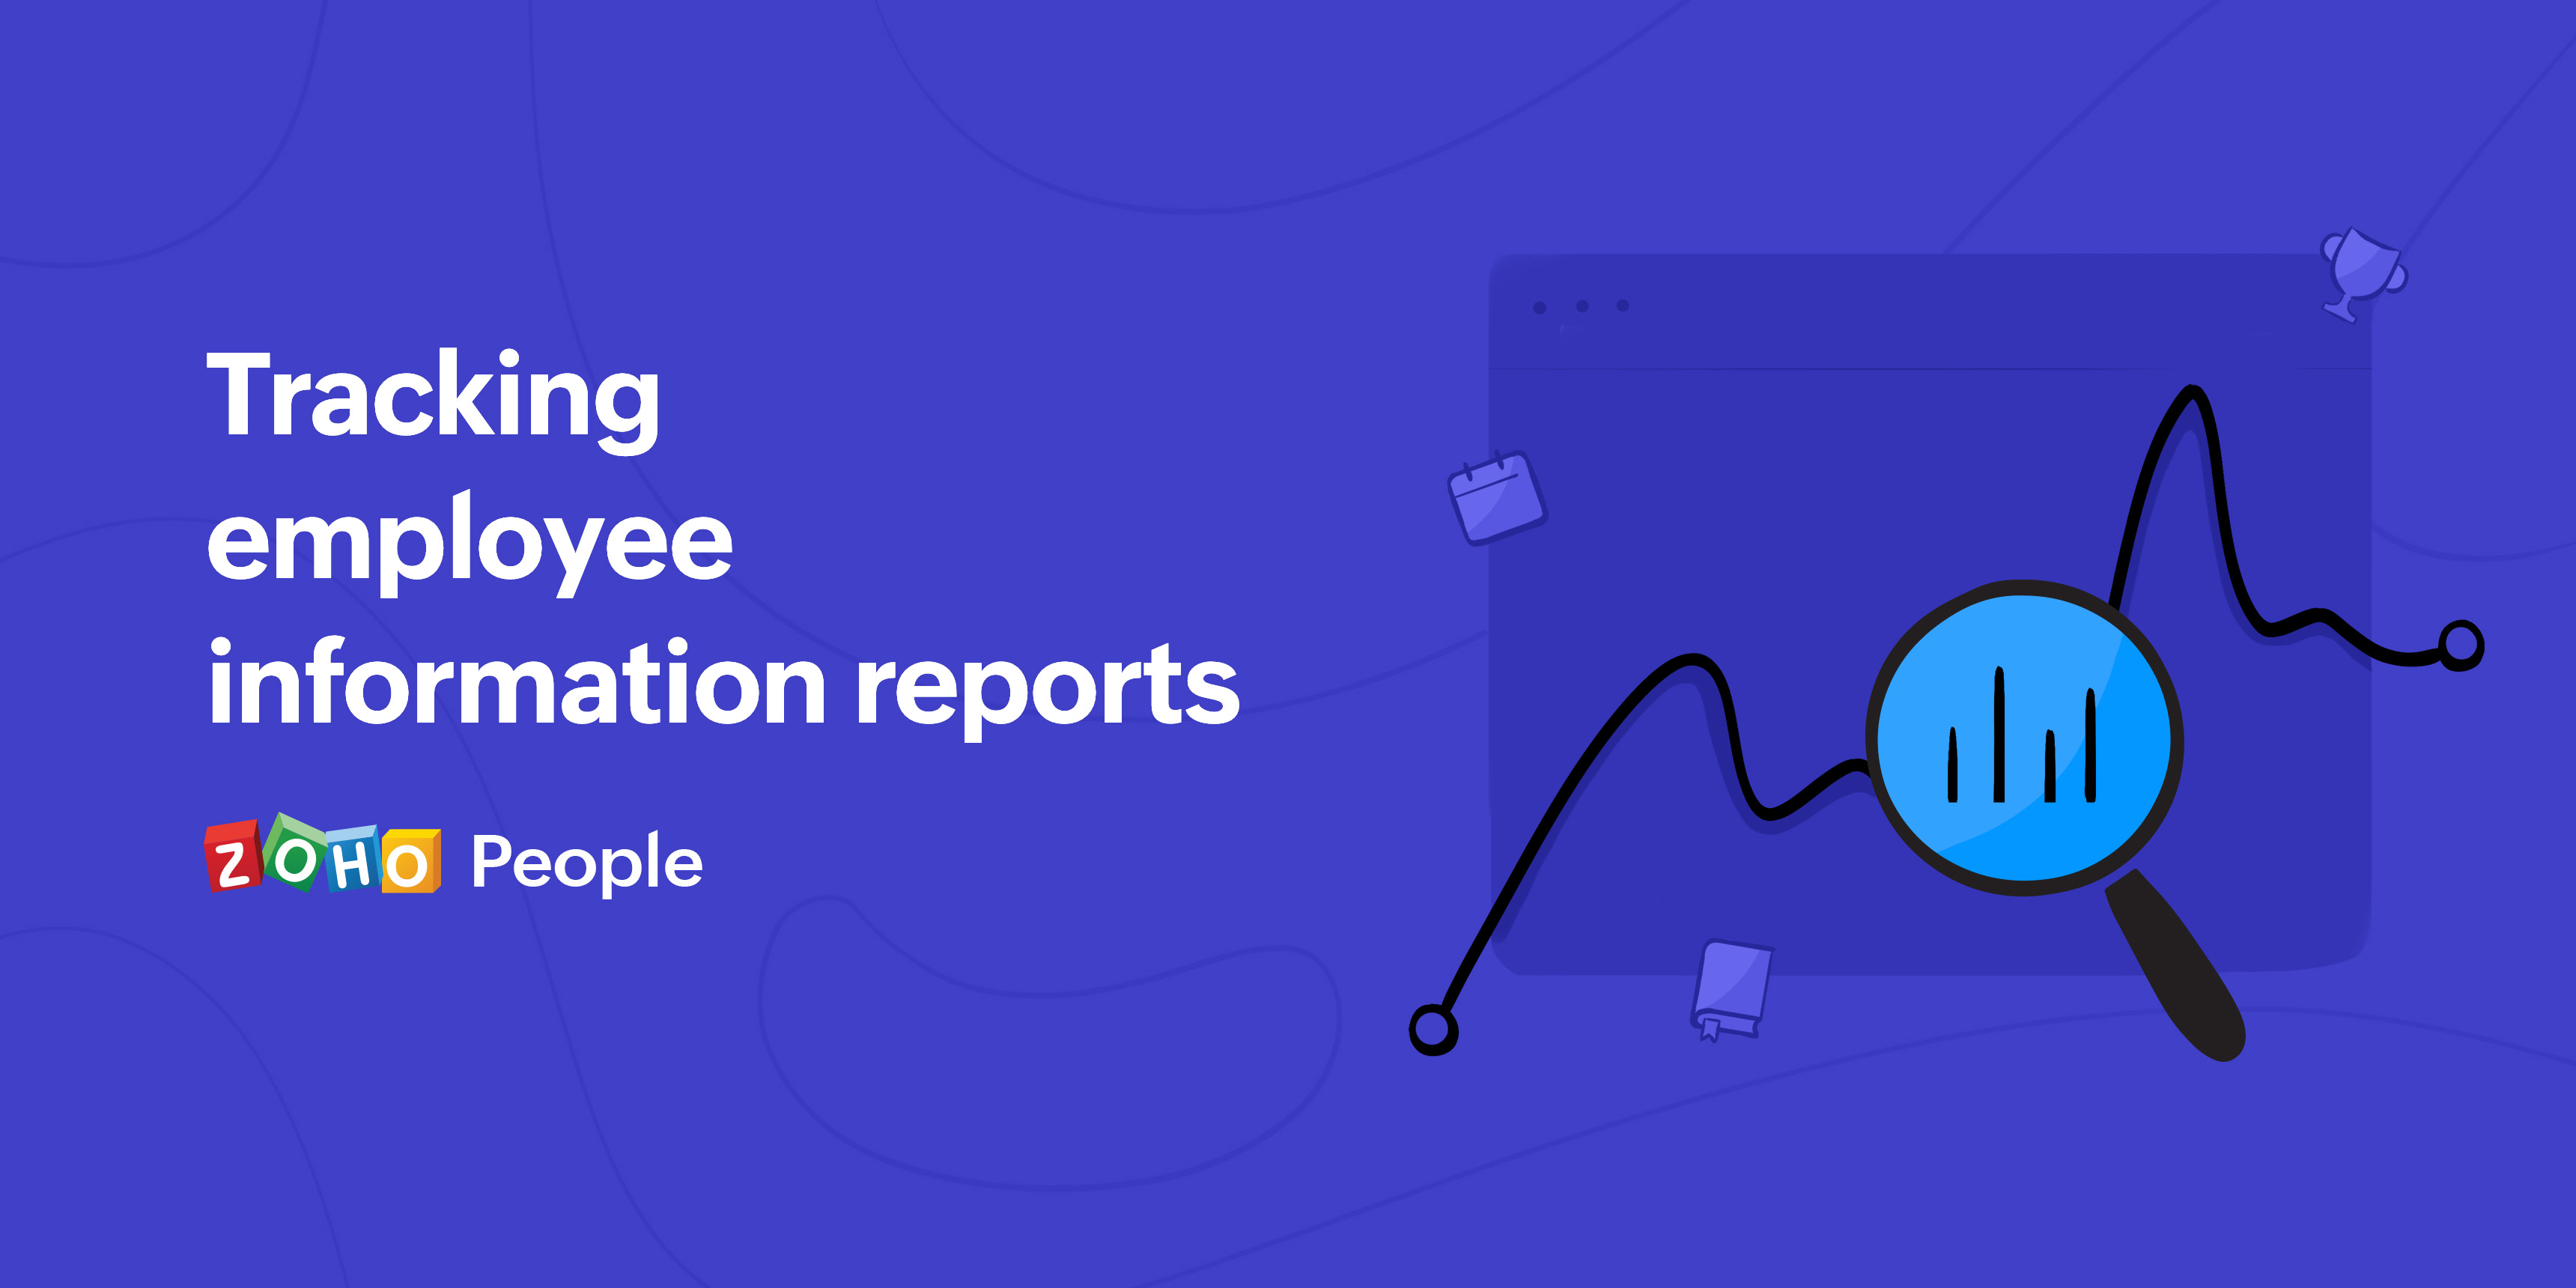 Tracking employee information reports